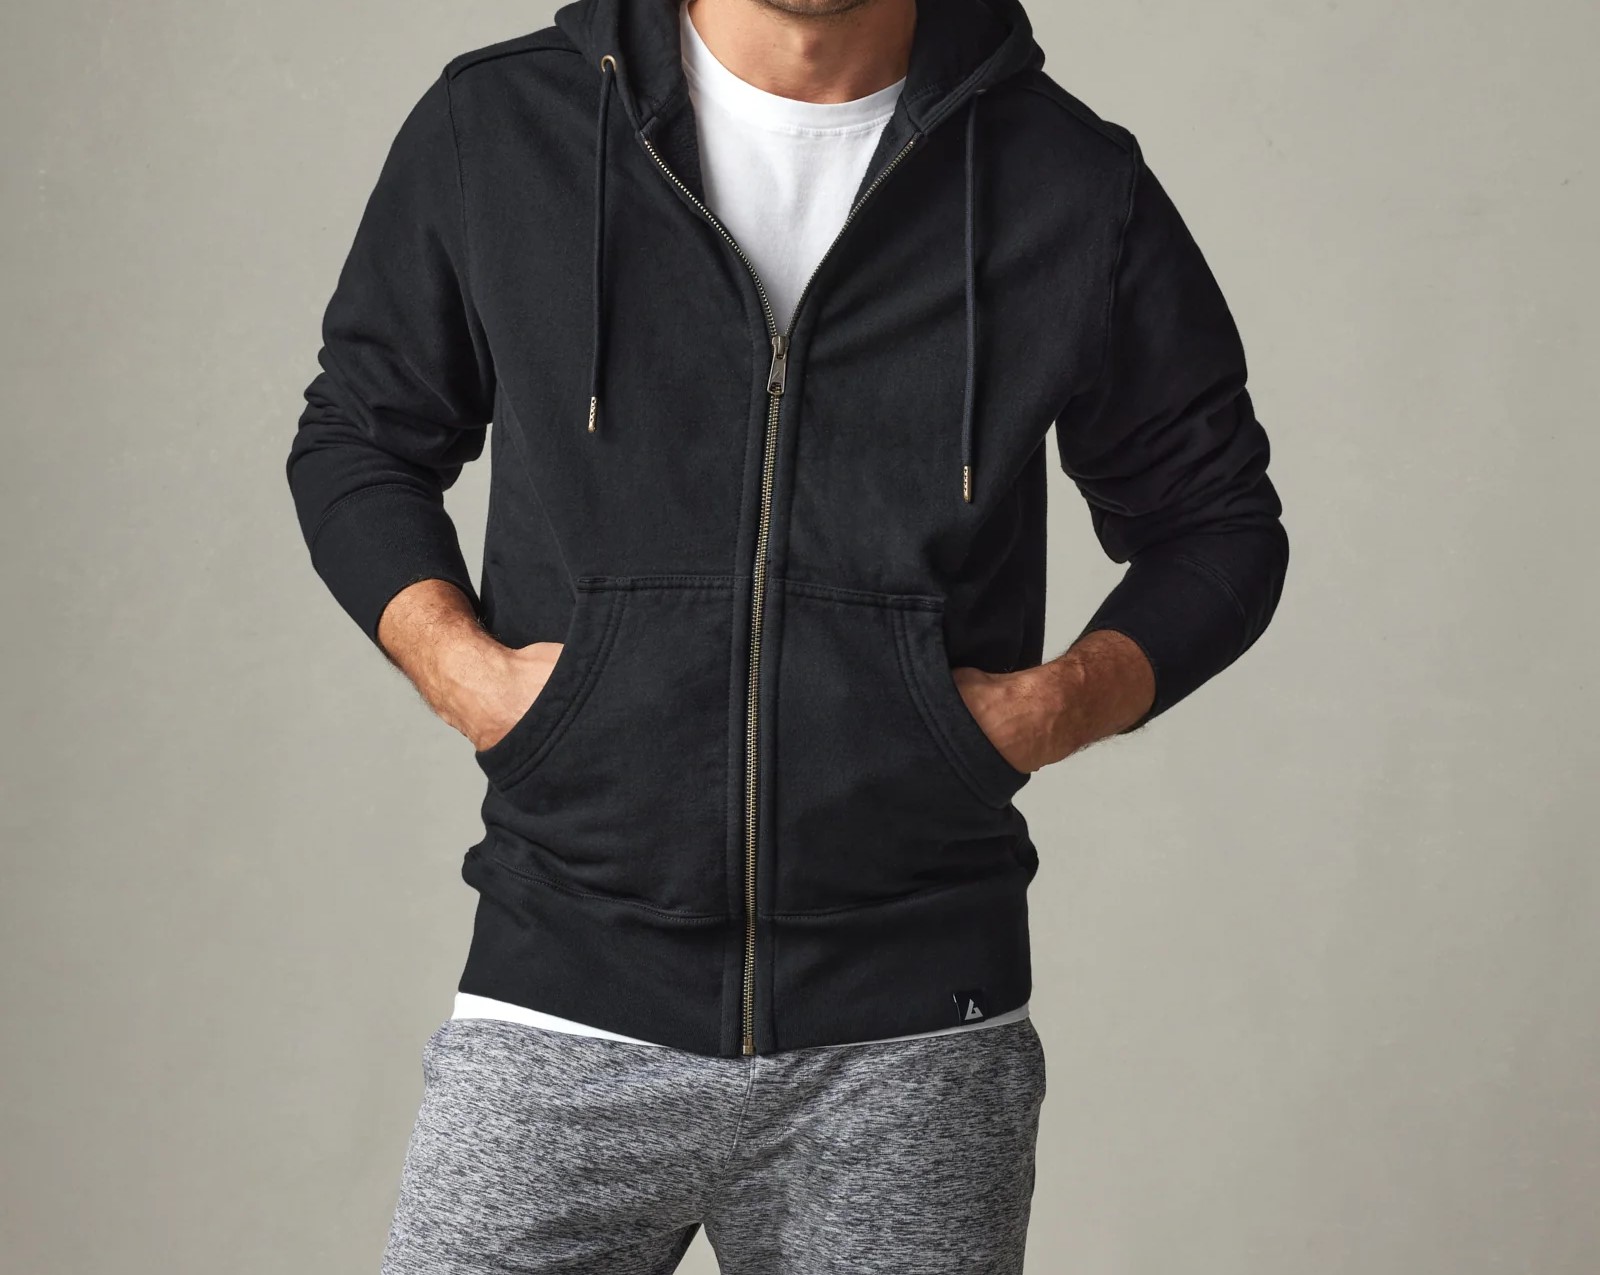 The Surprising Reason People Never Fully Zip Up Their Hoodies